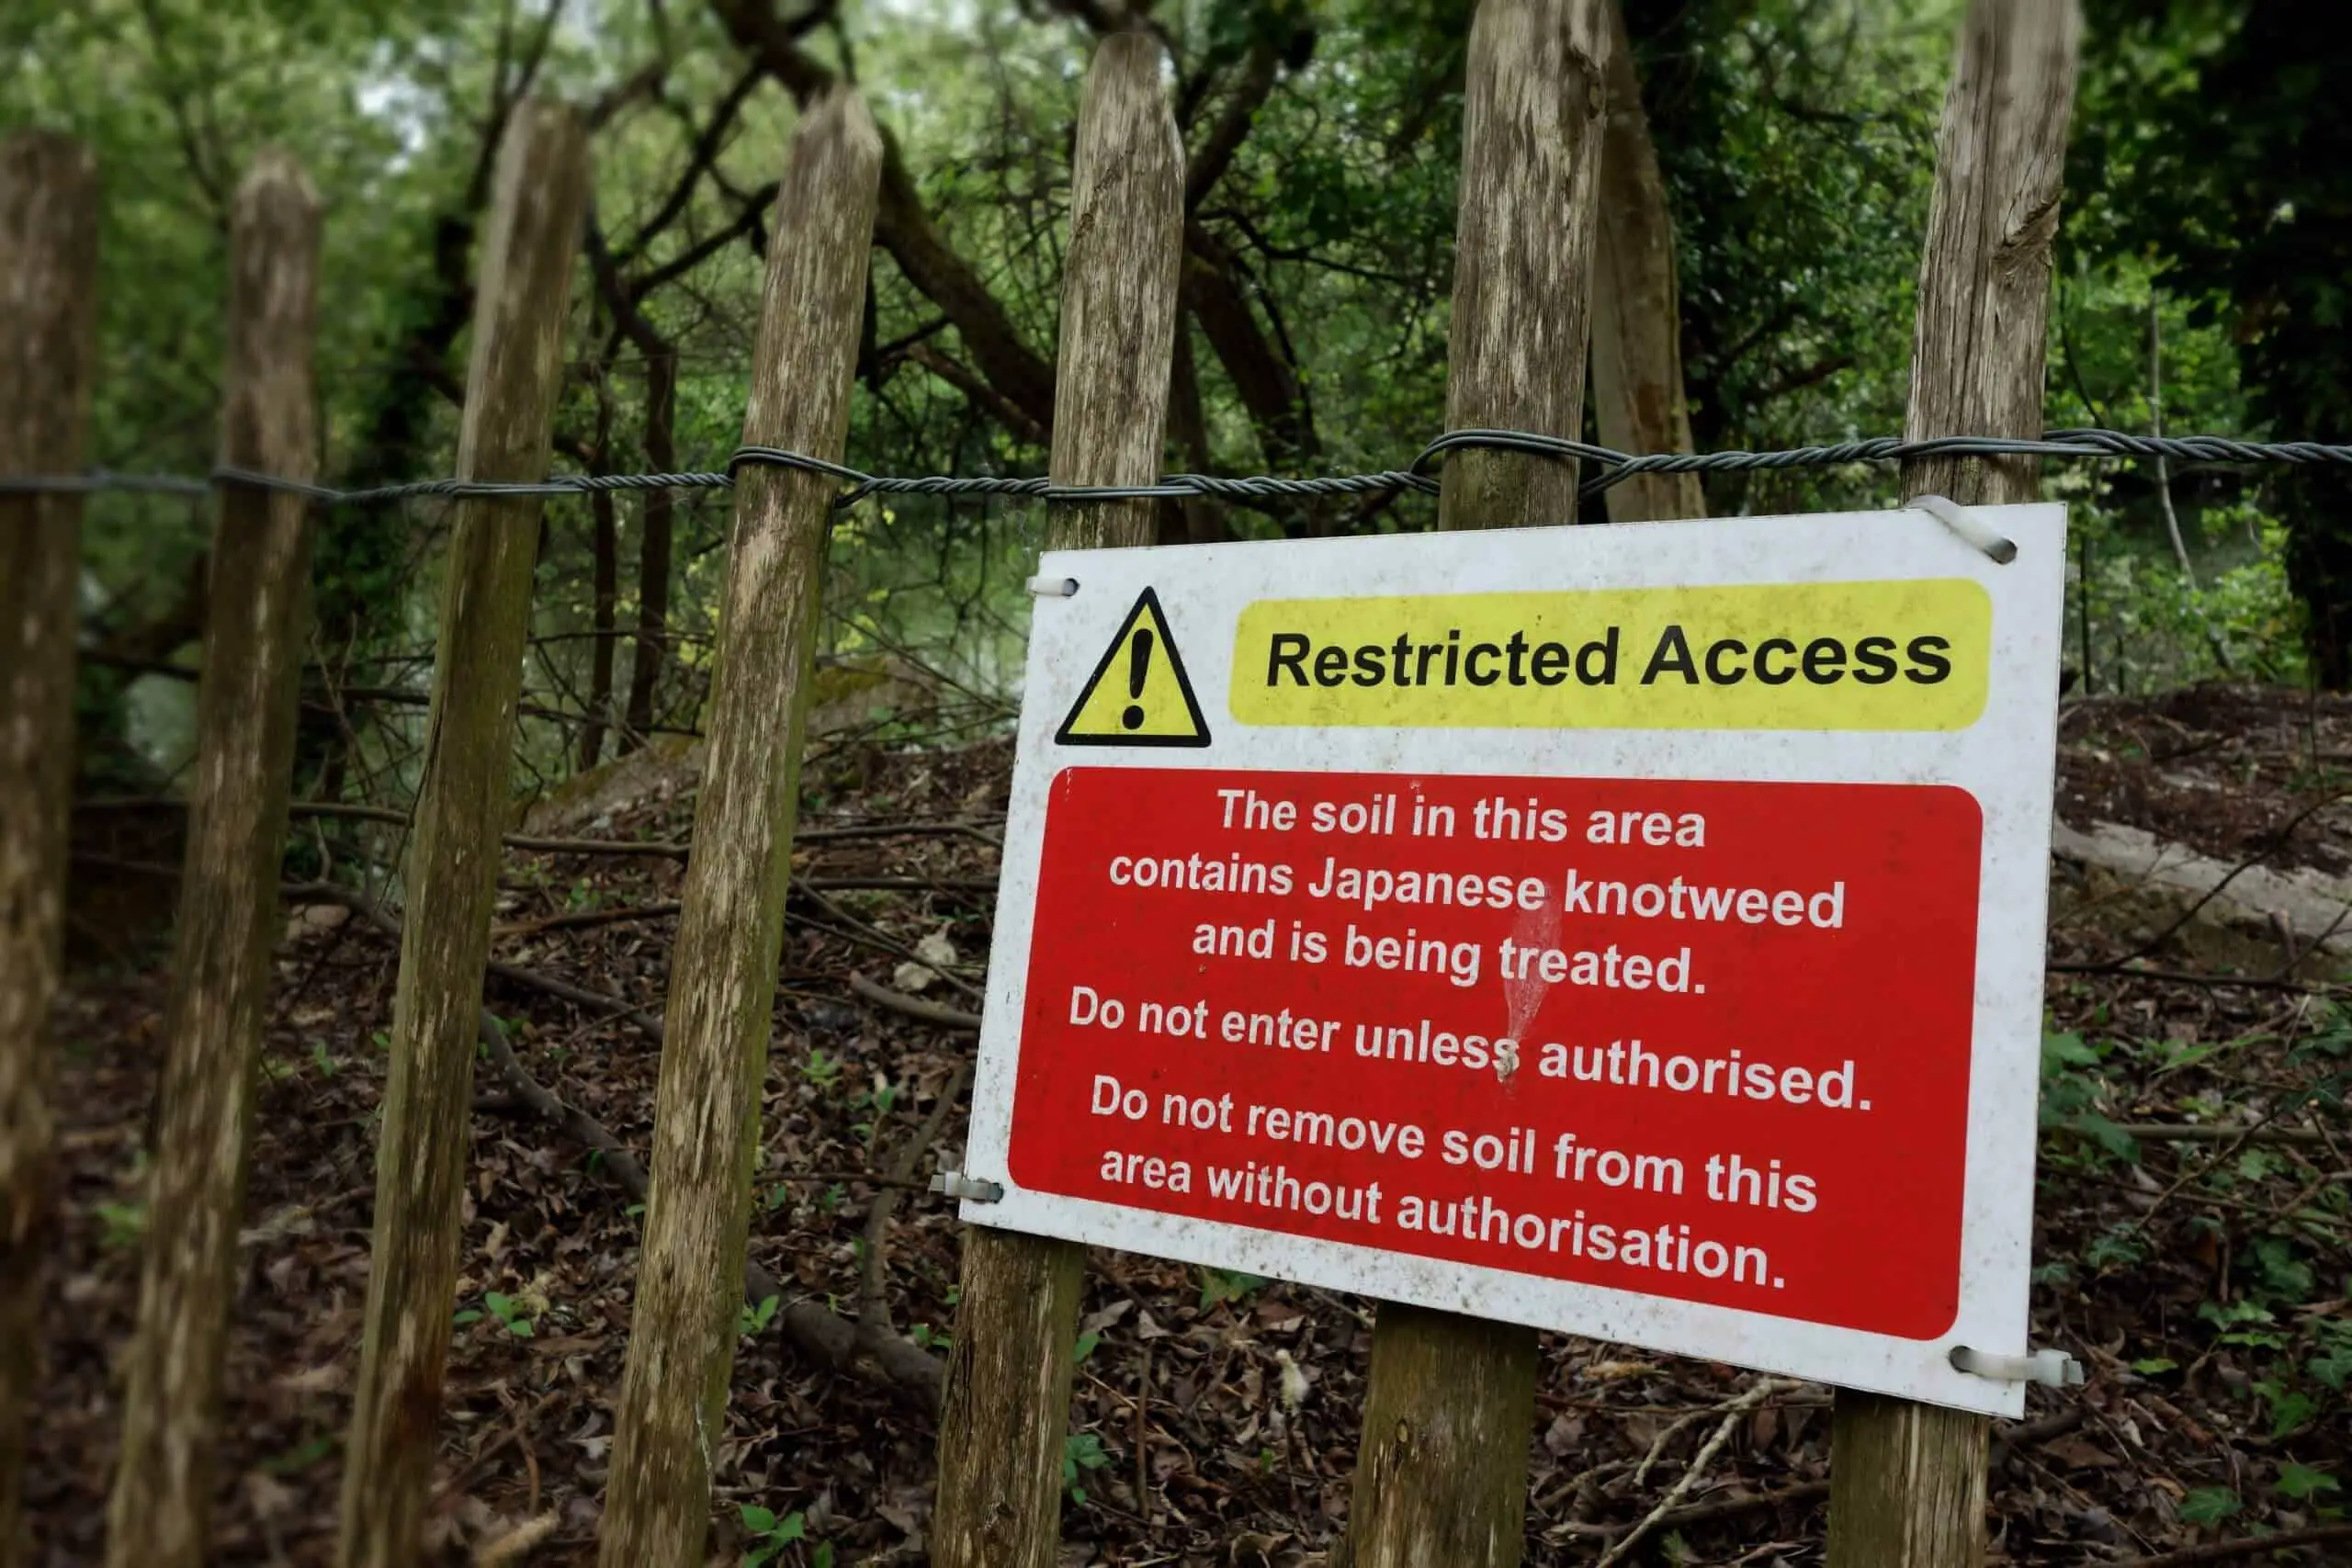 An area being treated for Japanese knotweed which is to be isolated